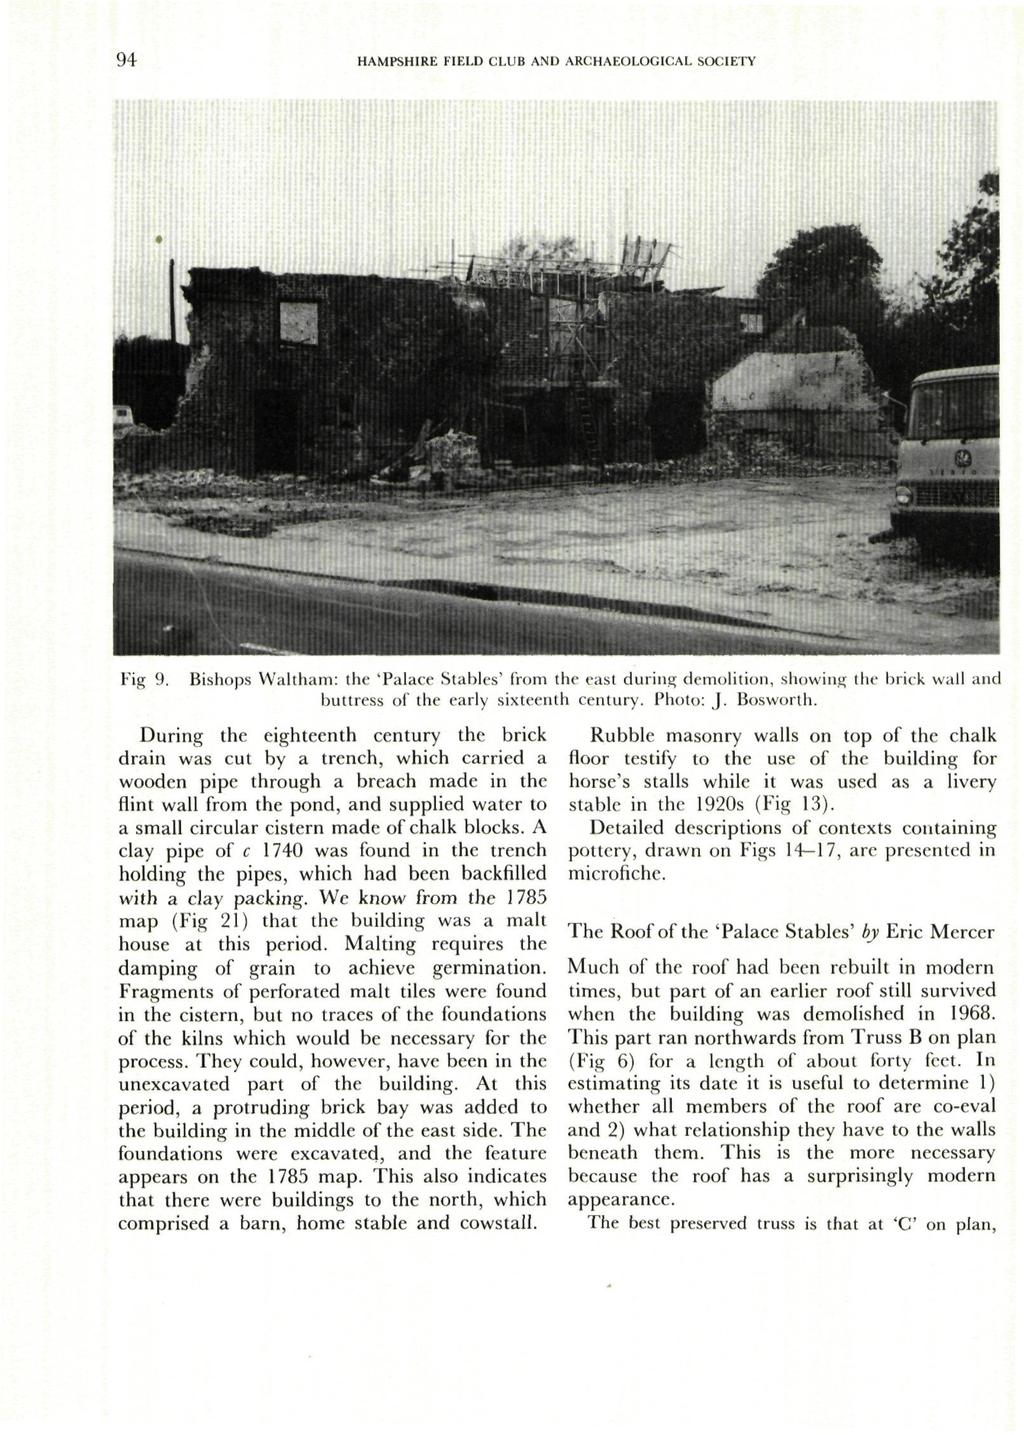 94 HAMPSHIRE FIELD CLUB AND ARCHAEOLOGICAL SOCIETY Fig 9. Bishops Waltham: the 'Palace Stables' from the east during demolition, showing the brick vval buttress of the early sixteenth century.